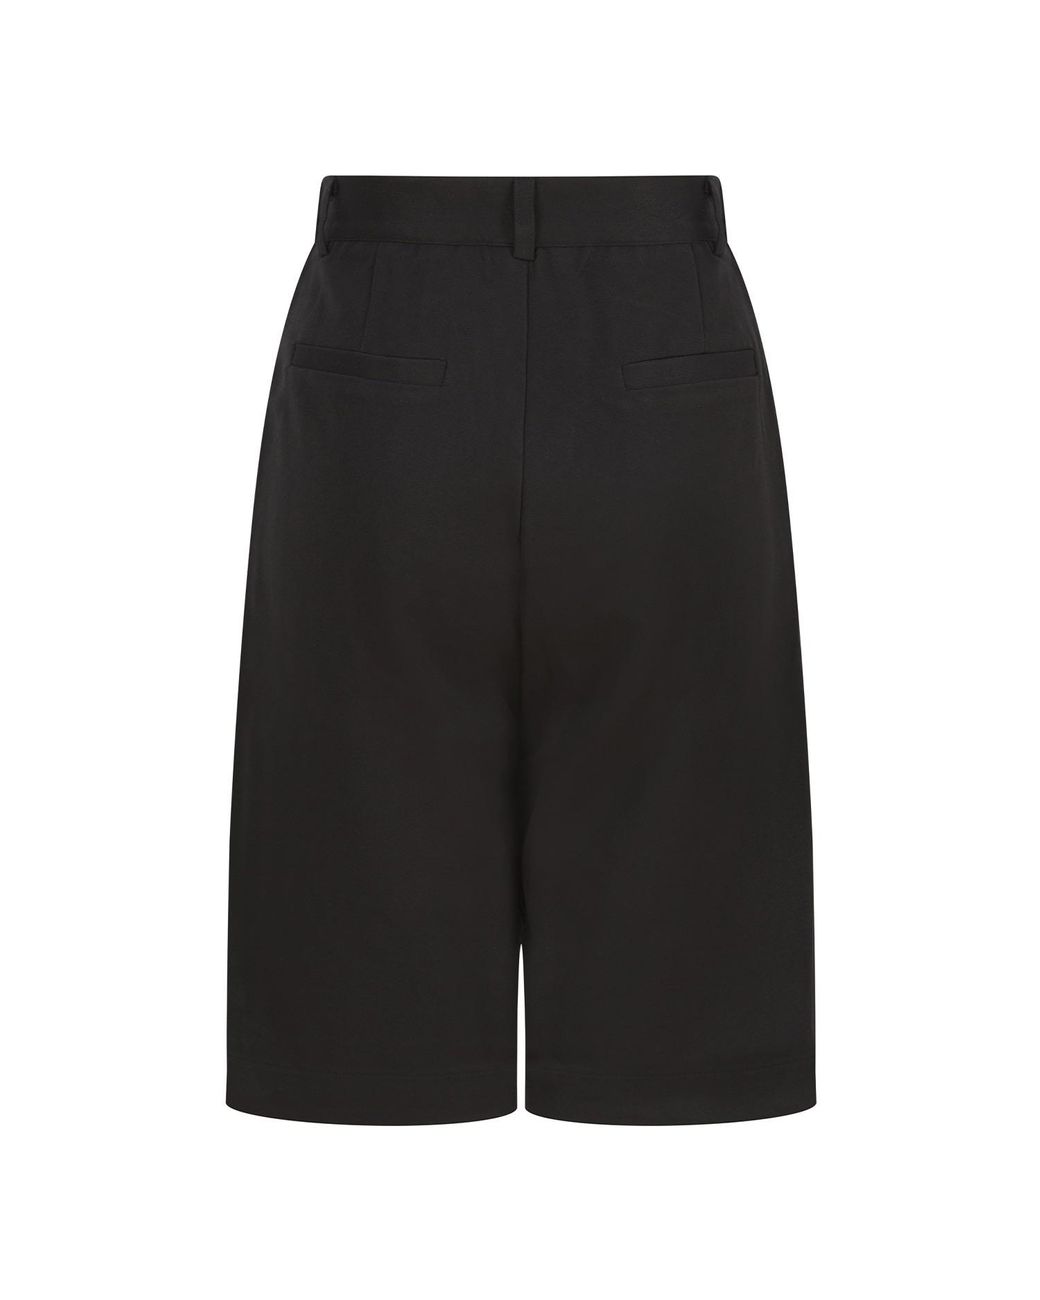 Absence of Colour Alina Shorts in Black | Lyst